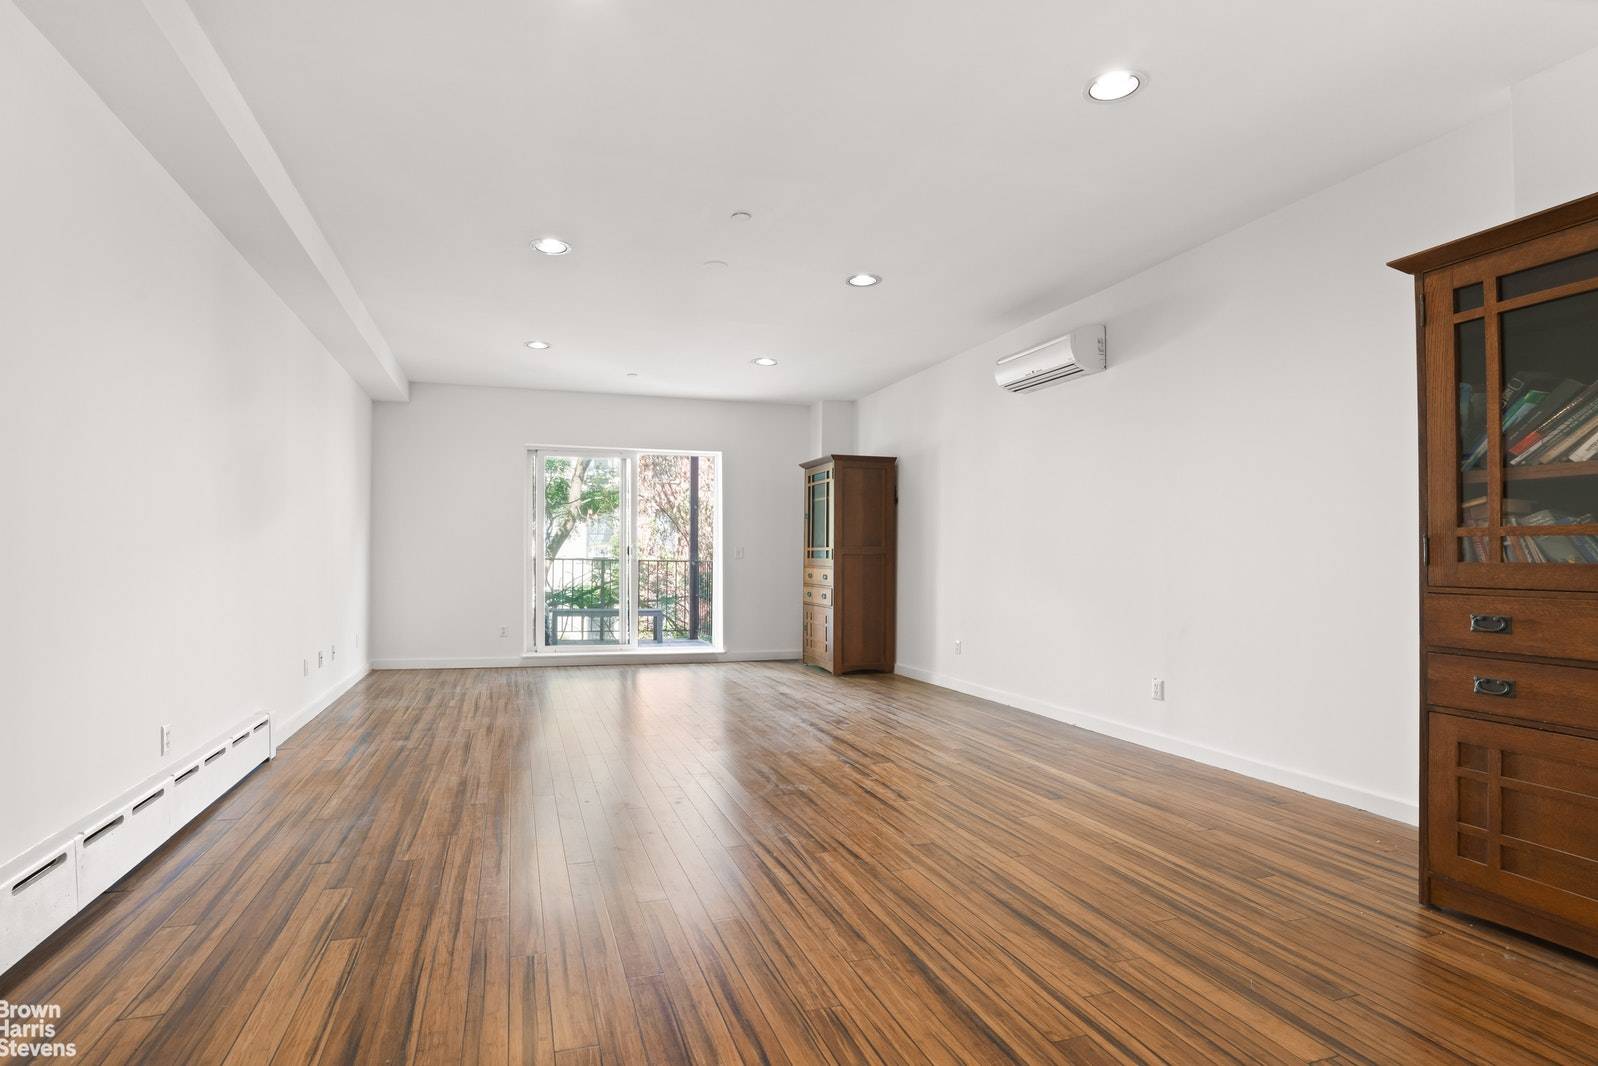 This 4 bedroom Triplex, in the heart Harlem, consists of over 3700 square feet of living space including over 1000 square feet of outdoor space in the form of 2 ...